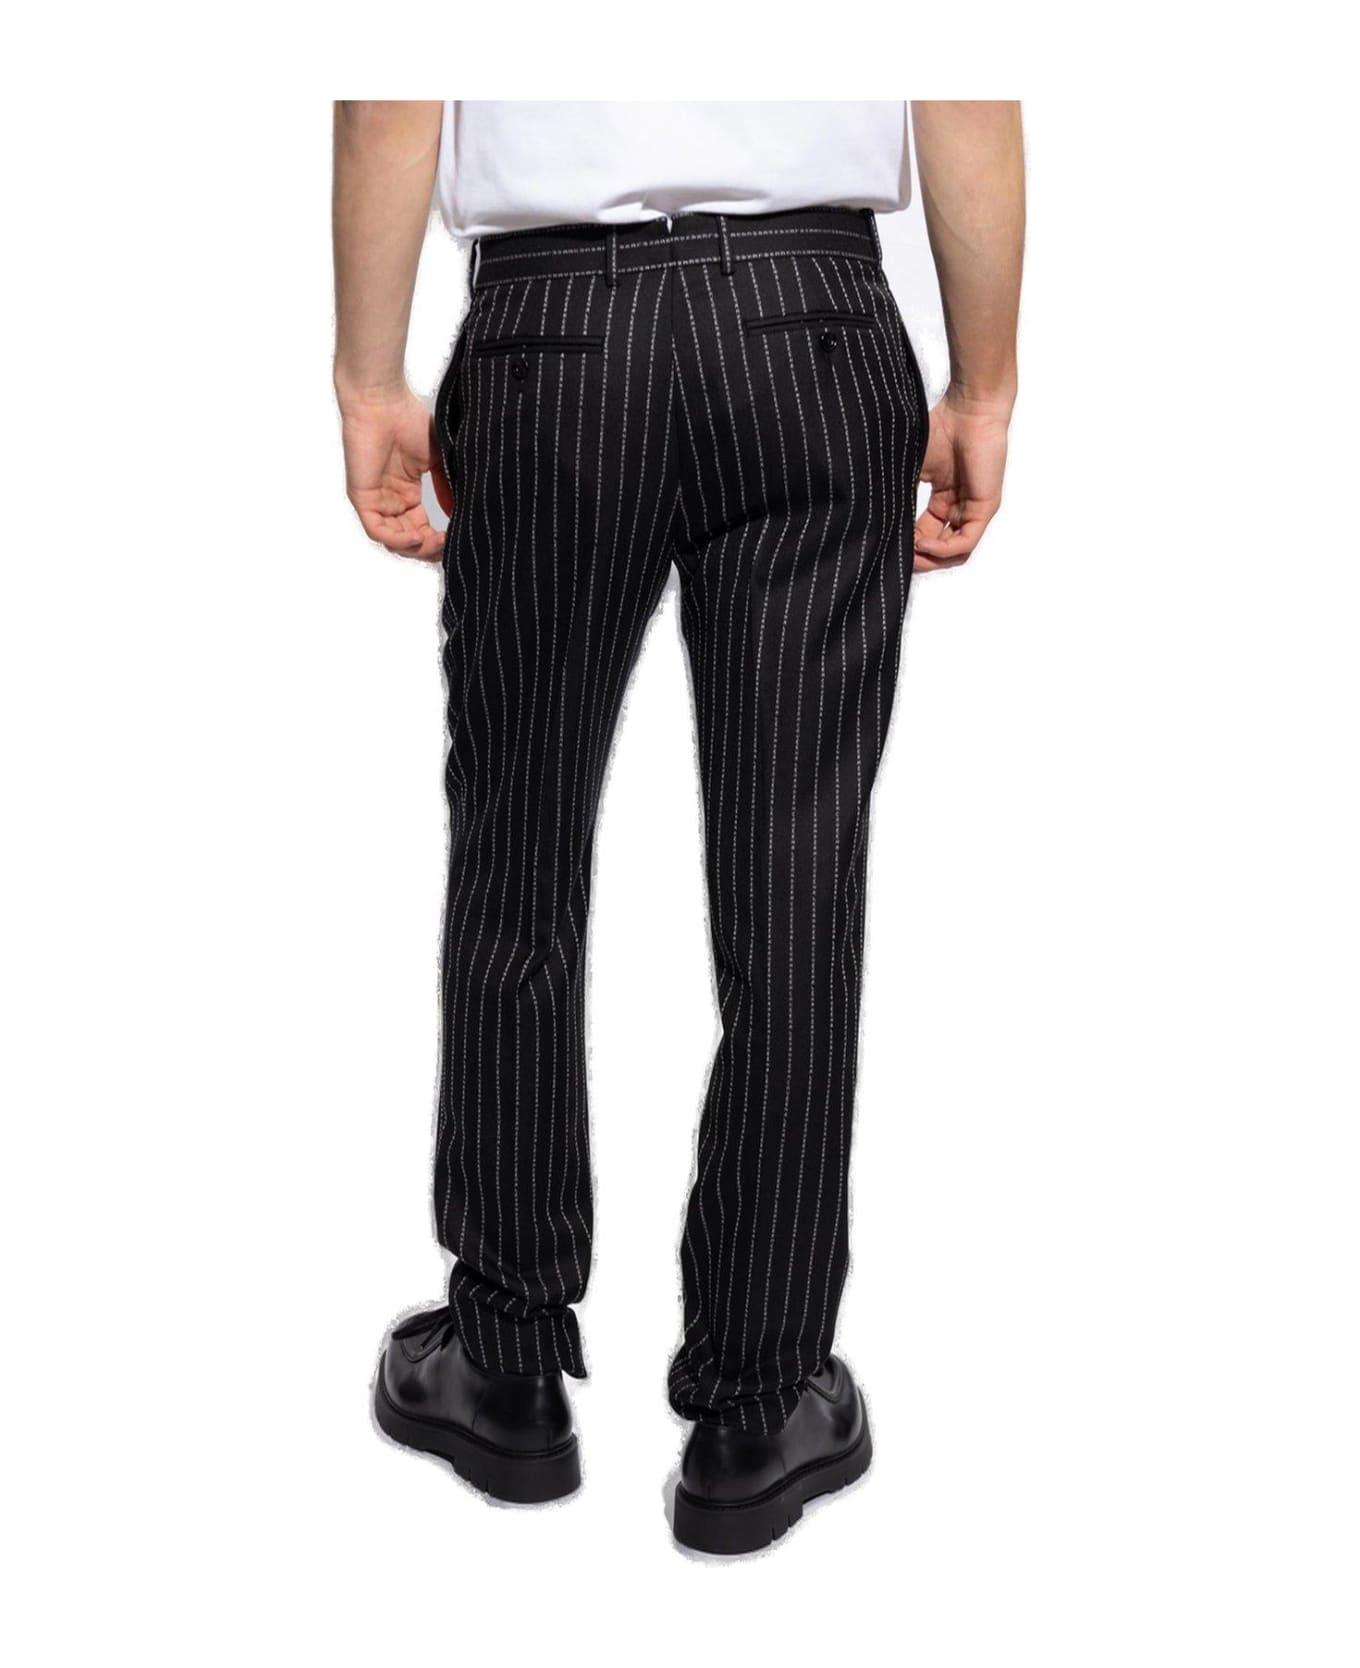 Alexander McQueen Pinstriped Peat Front Trousers - Black